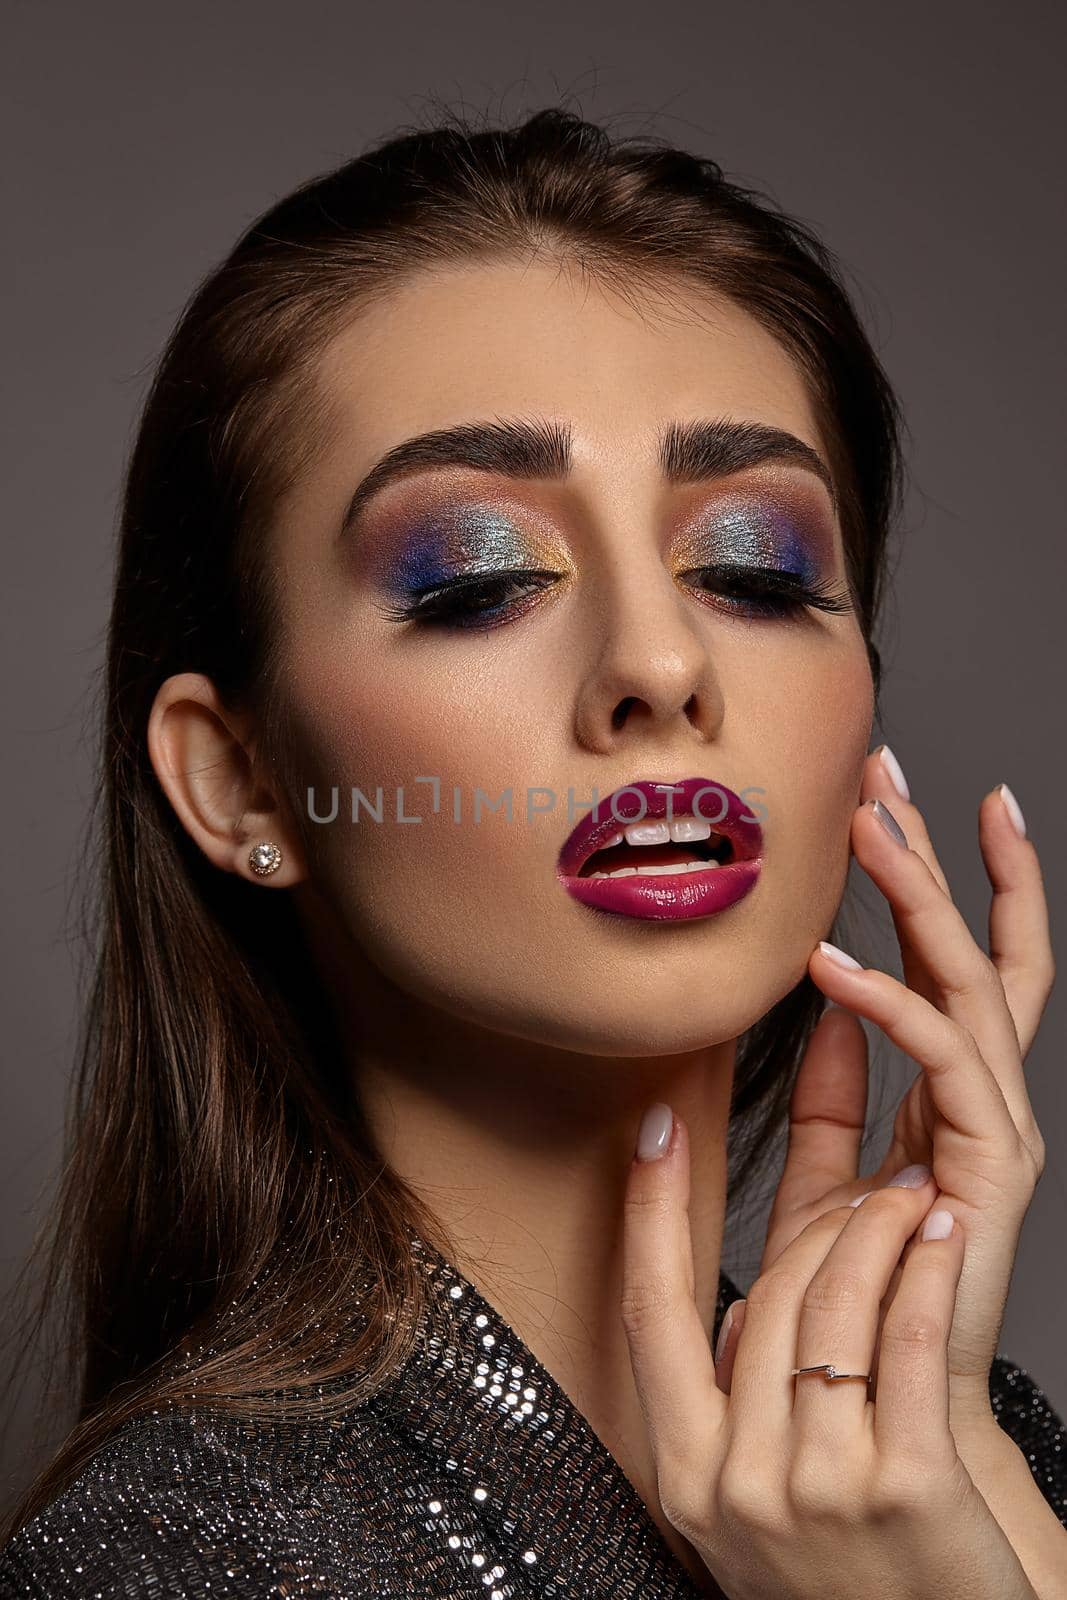 Brunette female in jewelry and black sparkling dress is touching her face, looking down, posing on gray background. Colorful eyeshadow, false eyelashes, glossy red lips. Professional makeup. Close up